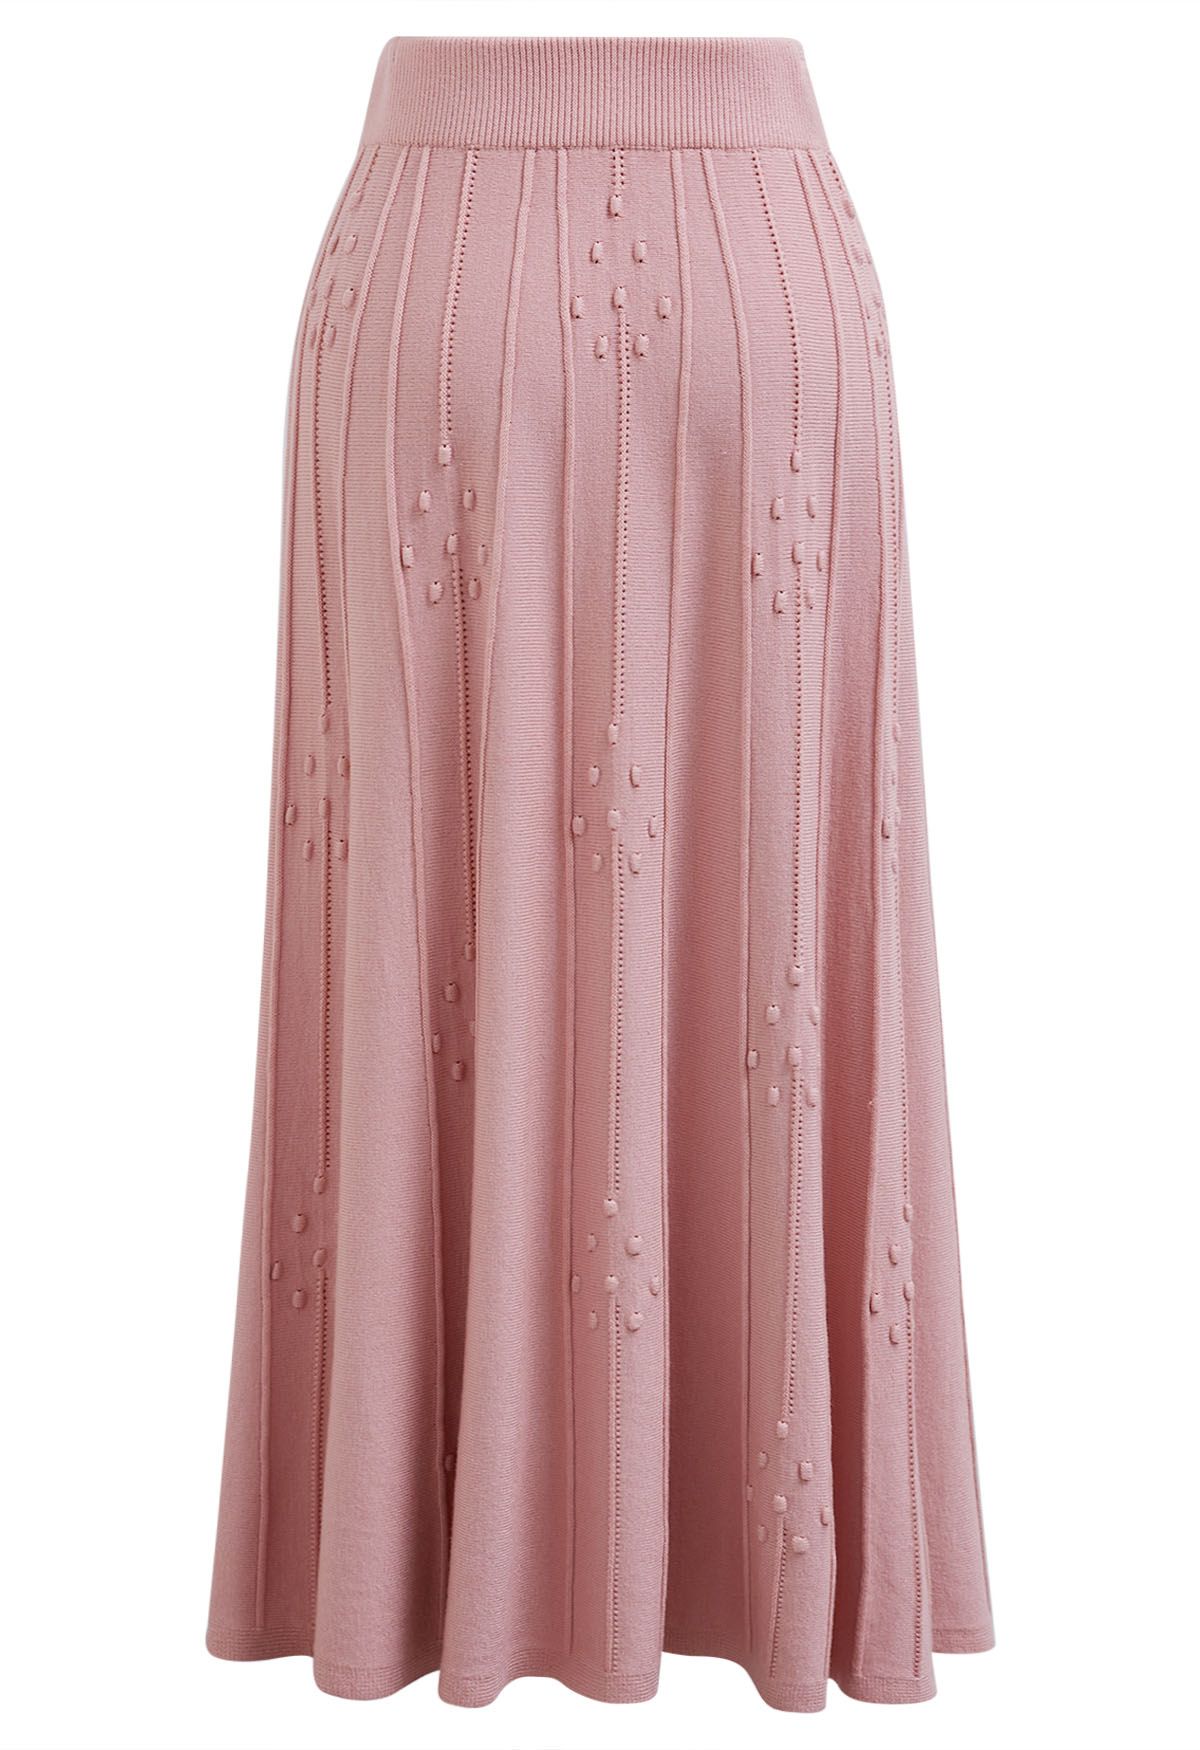 Embossed Dots Seam Knit Midi Skirt in Pink - Retro, Indie and Unique ...